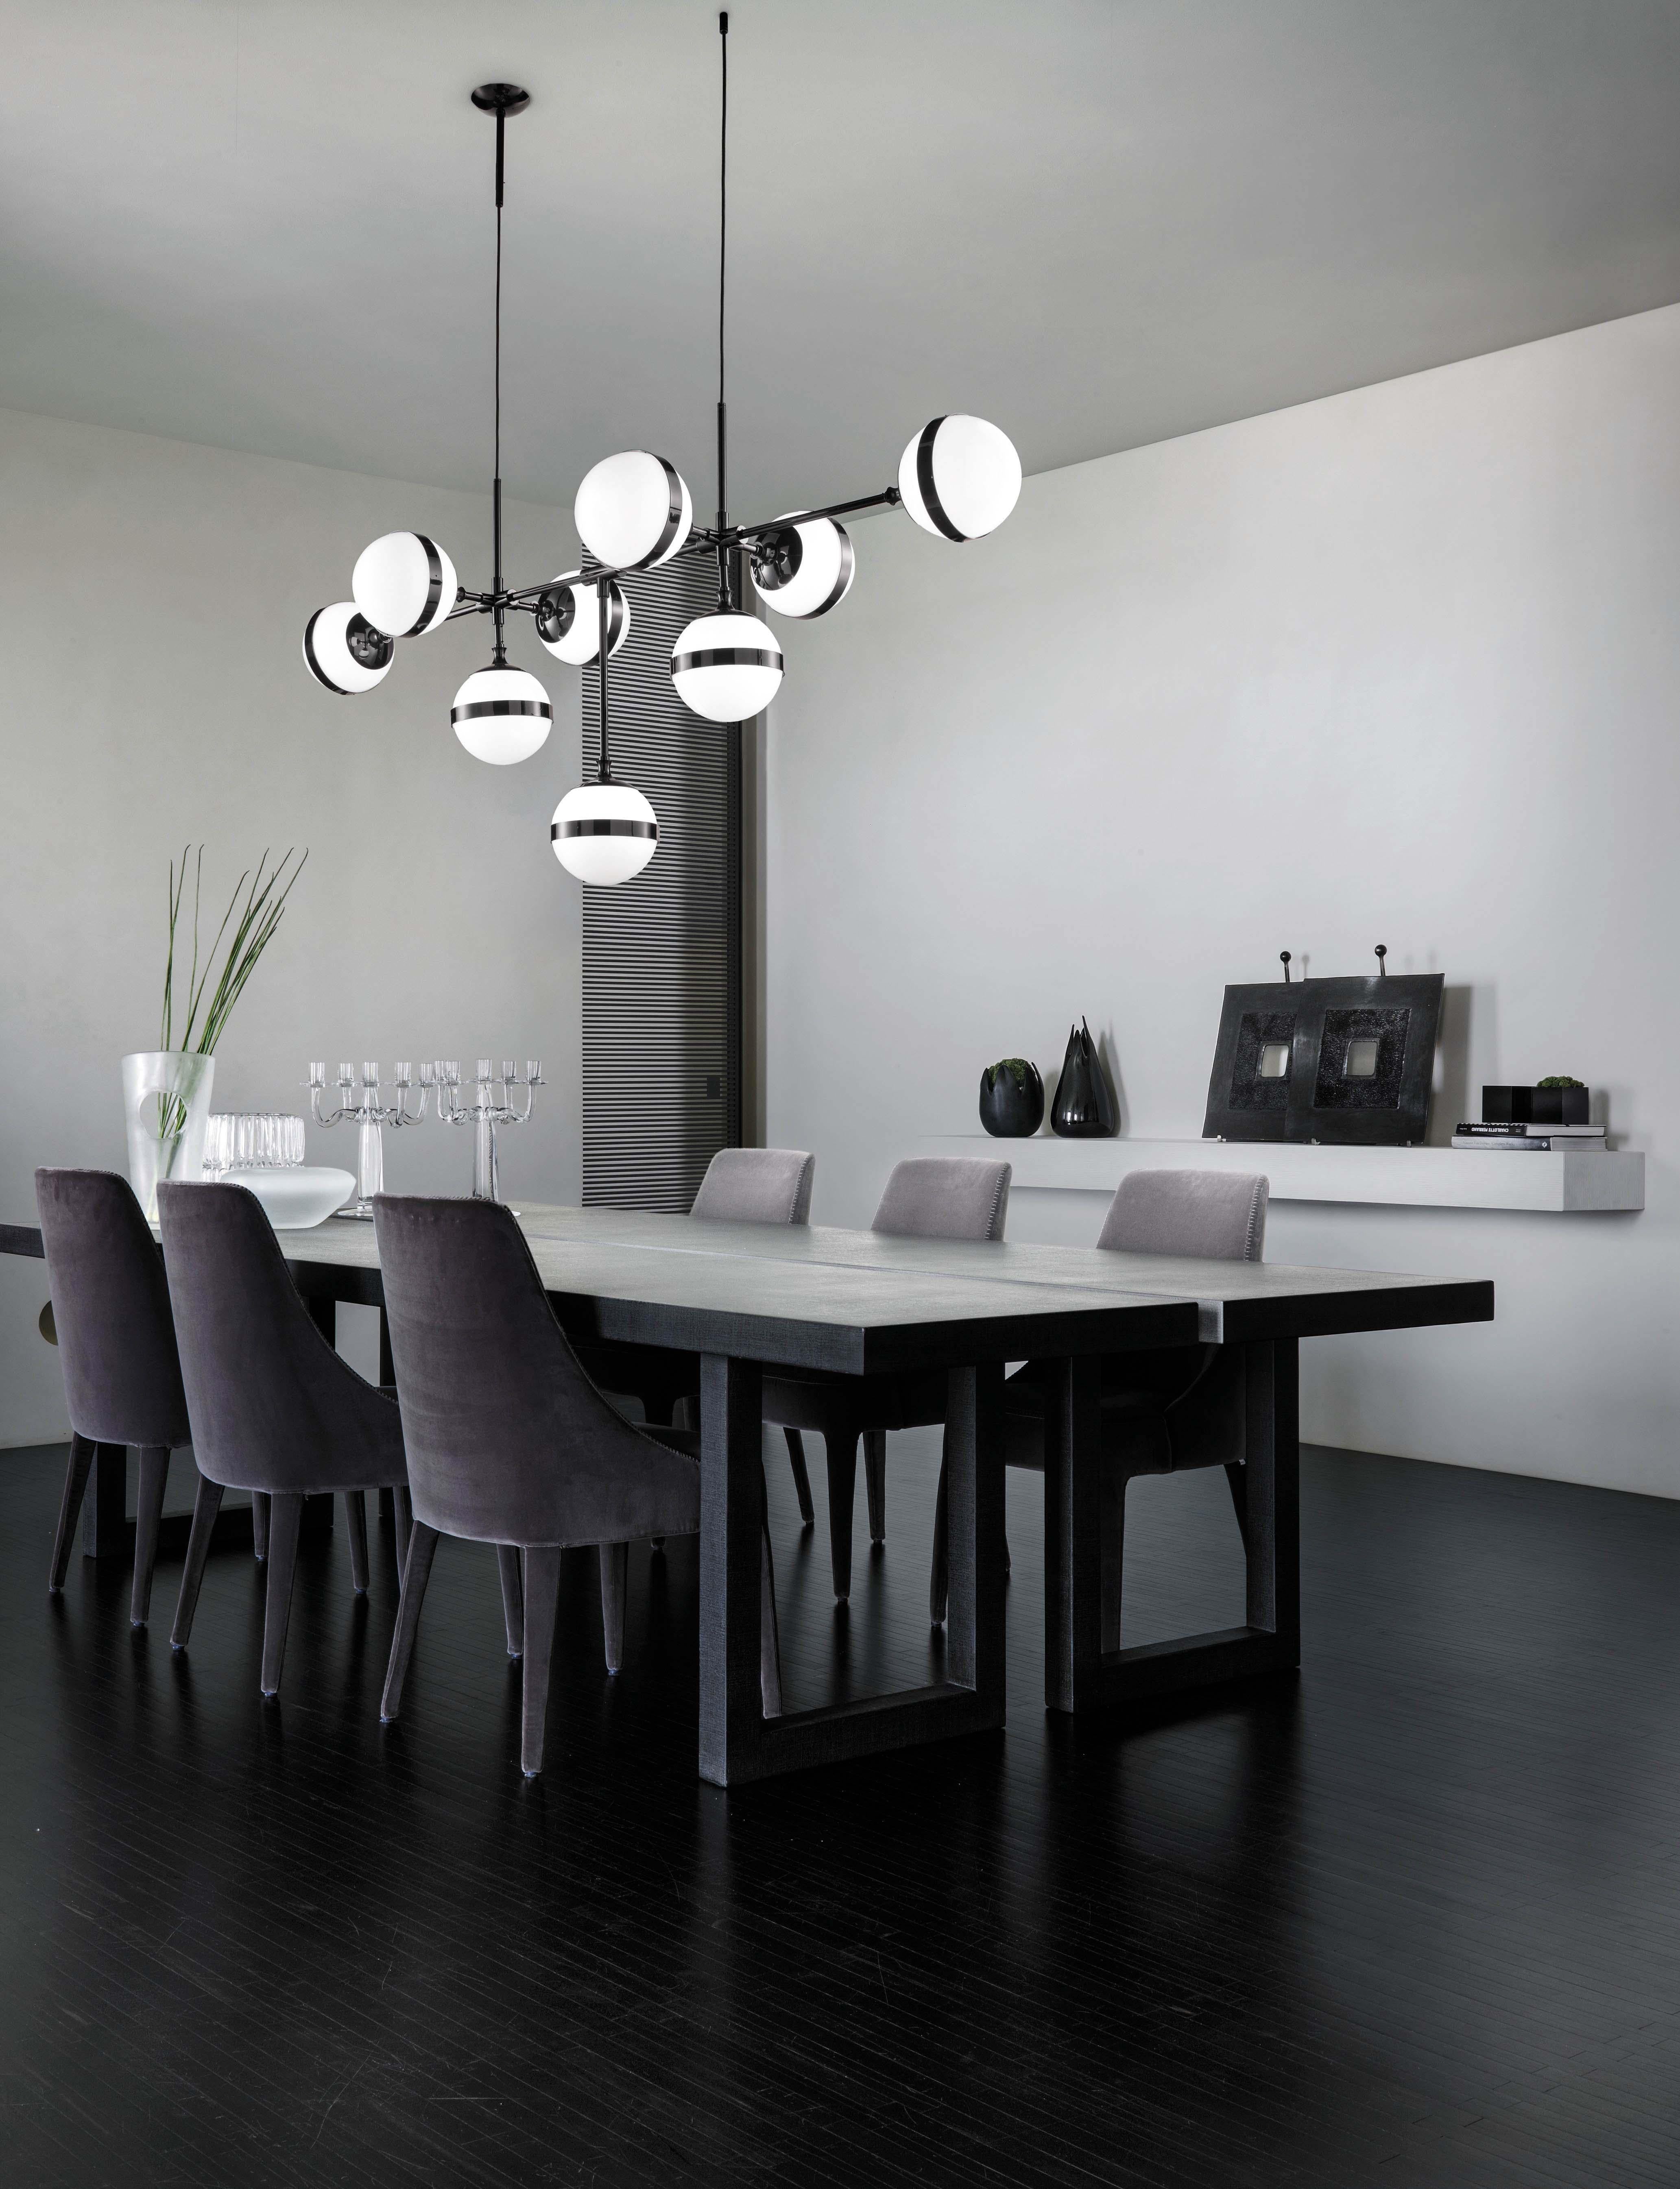 The white, blown handmade glass together with the glossy black metal, with a lead-effect treatment, interpret the polarity between black and white with the lightness of a rational and elegant design. With an impressive installation the lighting